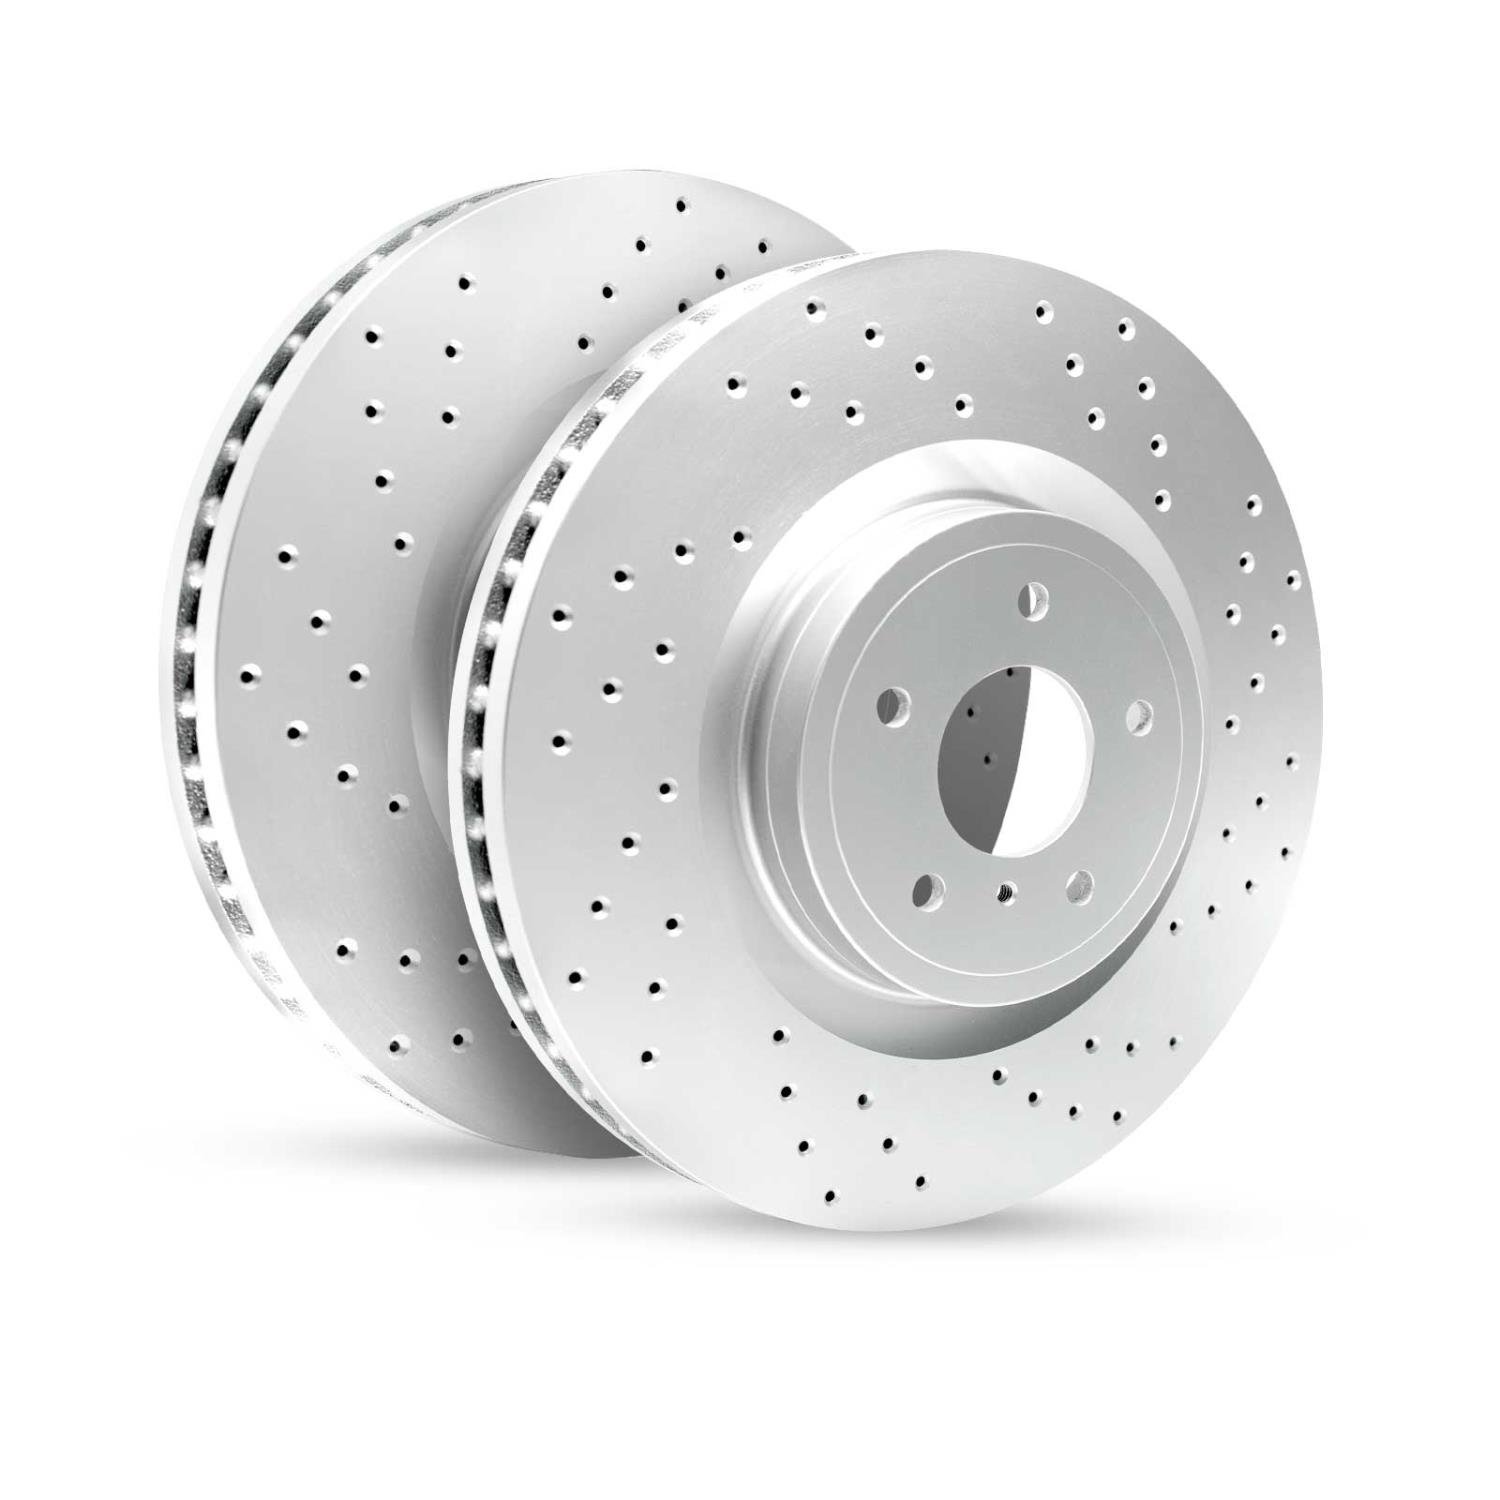 GEO-Carbon Drilled/Slotted Rotors, 2015-2020 Fits Multiple Makes/Models, Position: Rear